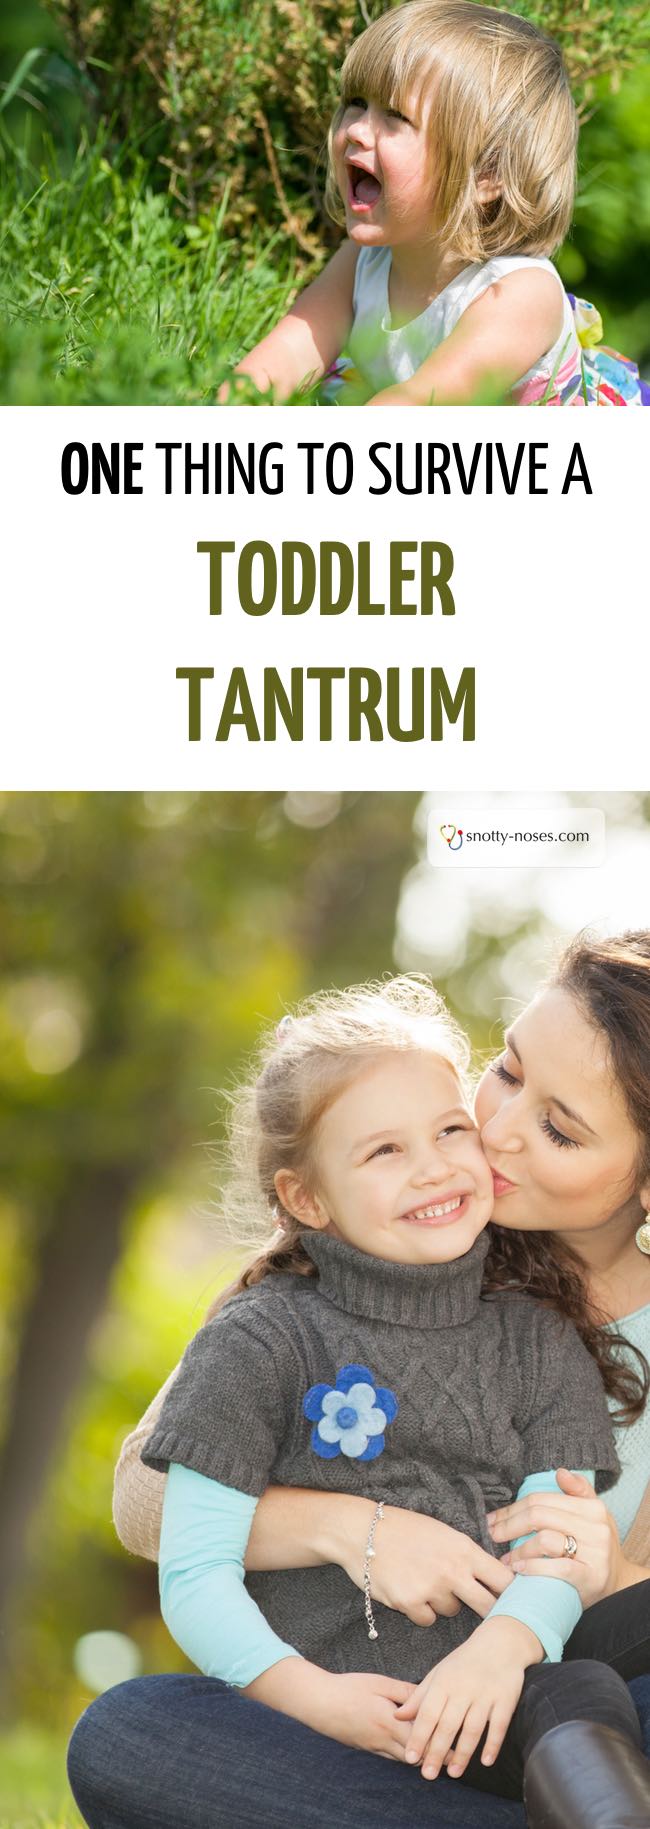 All toddlers have tantrums, it is impossible to avoid all melt downs. There is ONE things that us parents need to survive our child's tantrum. #parenting #parents #parenthood #parentlife #lifewithkids #positiveparenting #positivediscipline #alternativestimeout #postiveparentingsolutions #toddlerdiscipline #toddlertantrums #tantrums